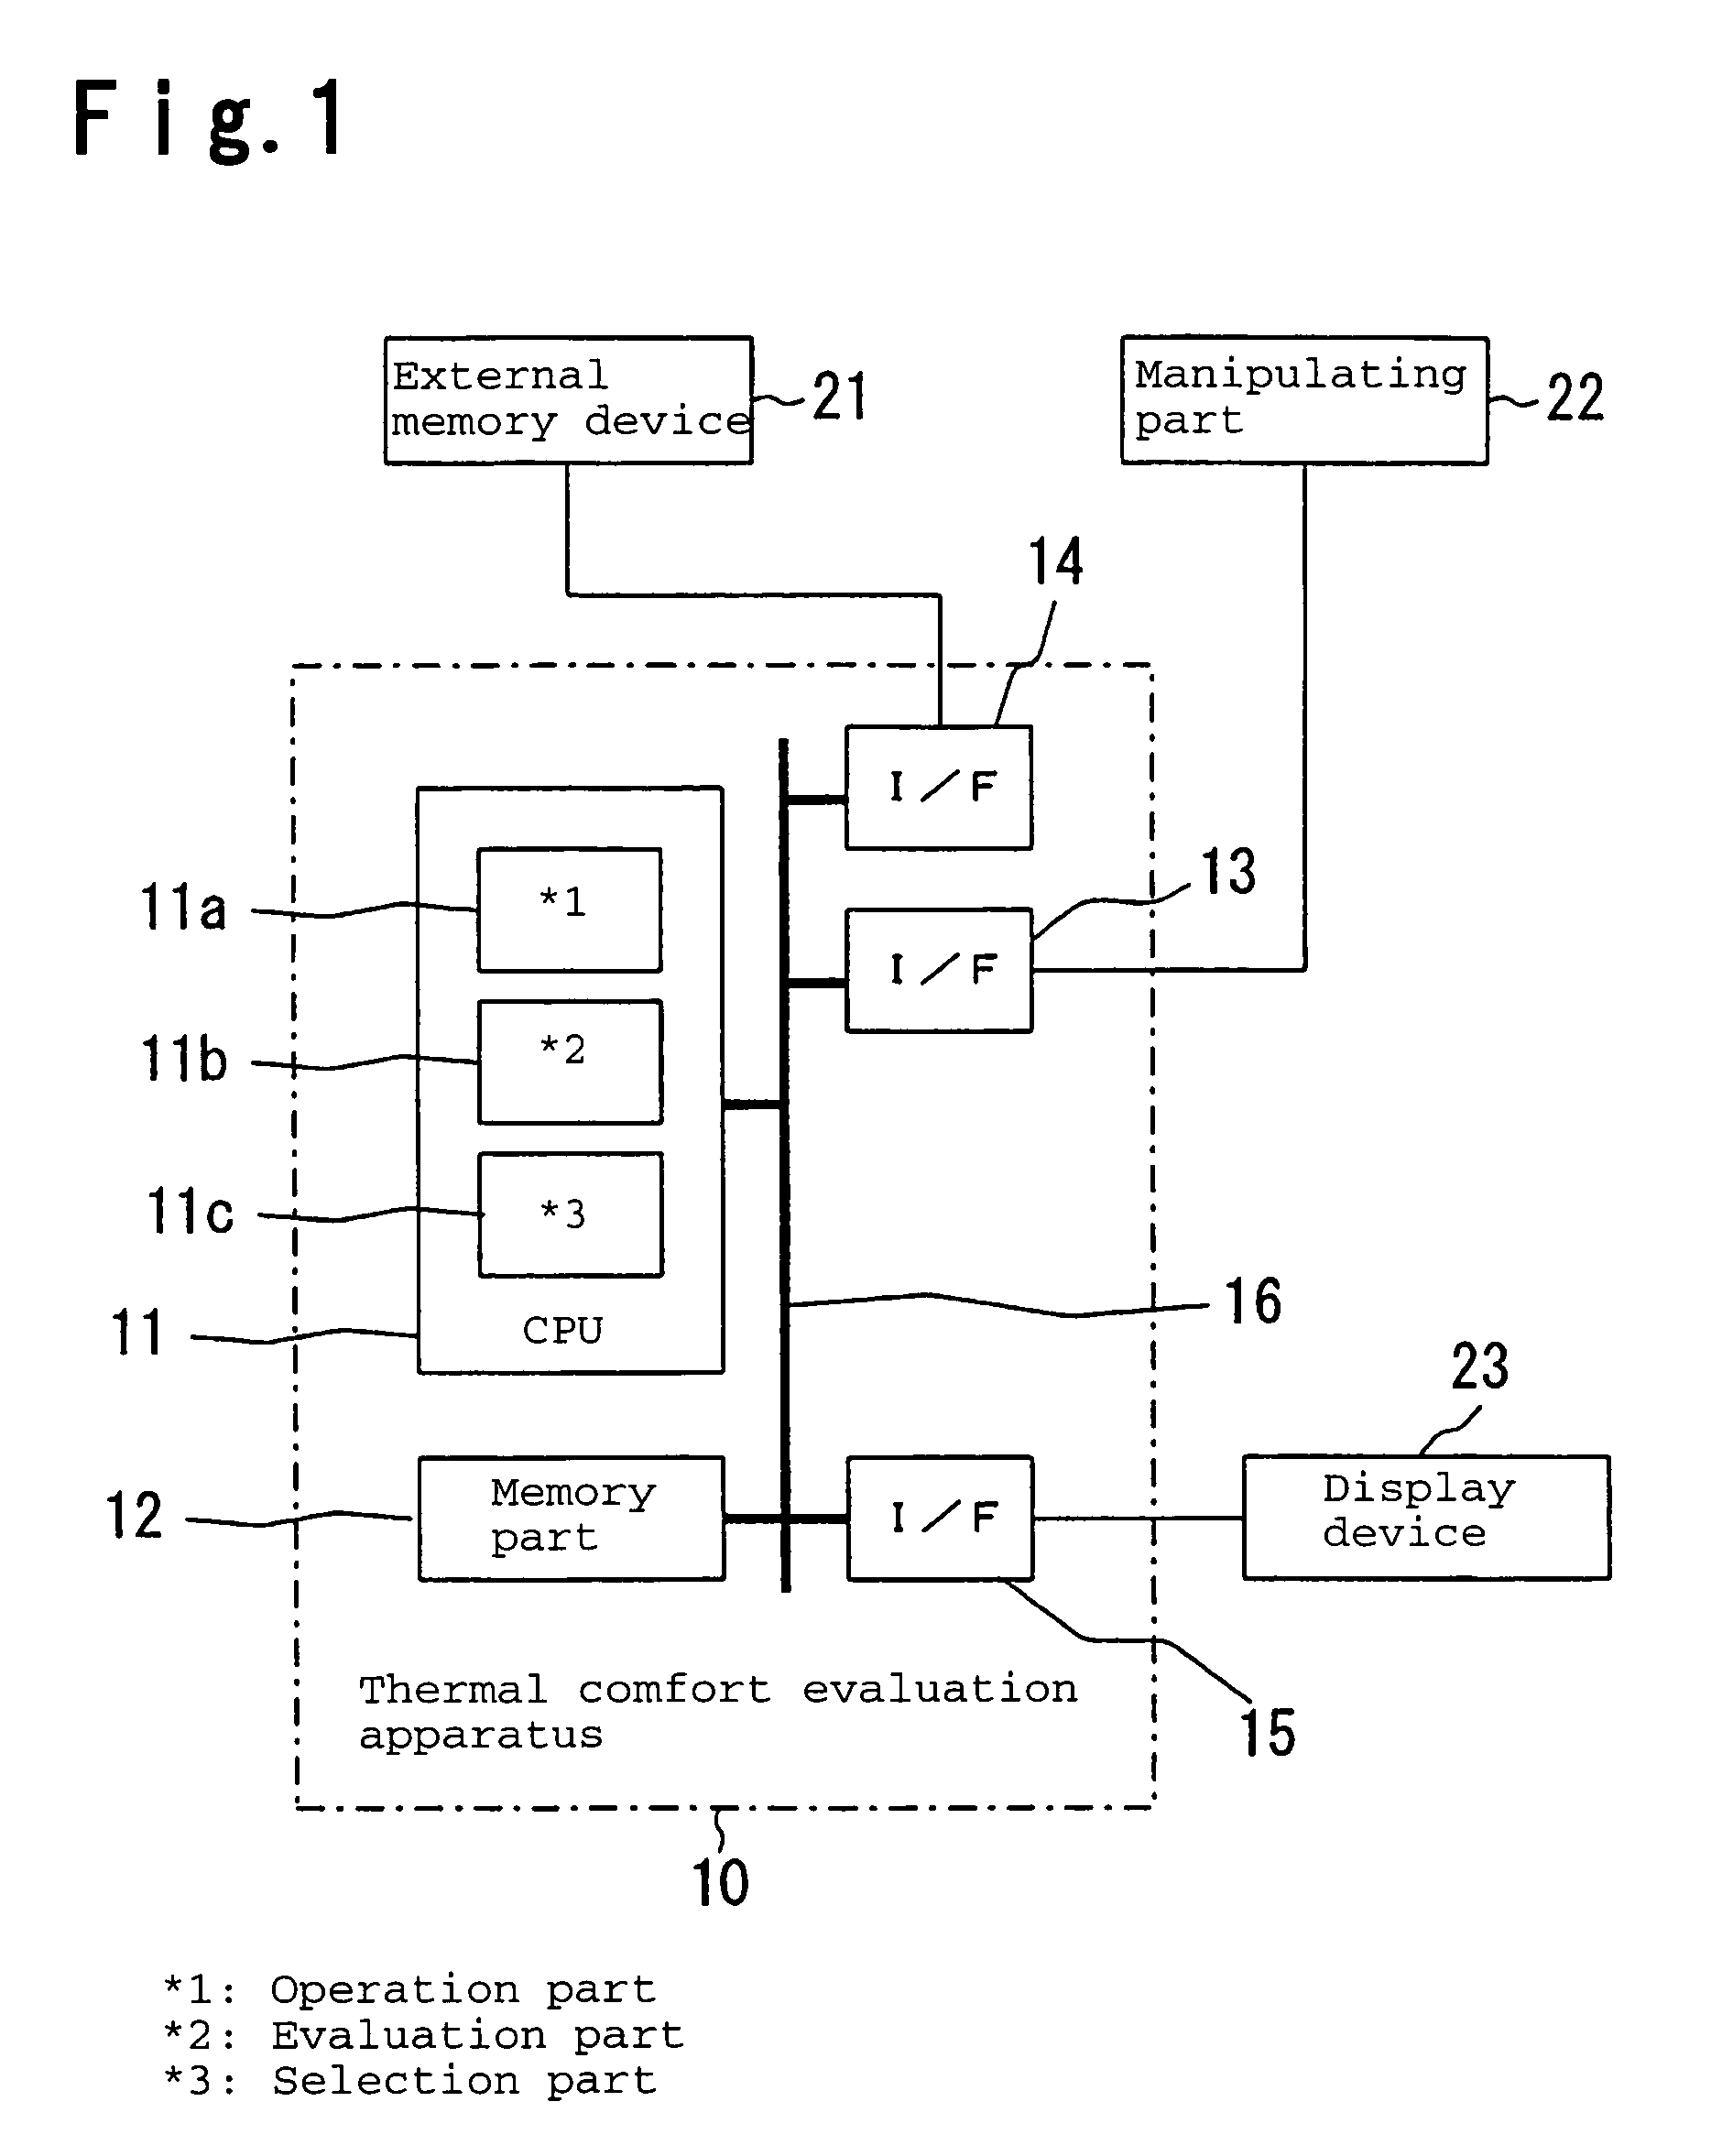 Method for evaluating thermal comfort of a structure and an assisting method, program or system for designing a structure in consideration of thermal comfort